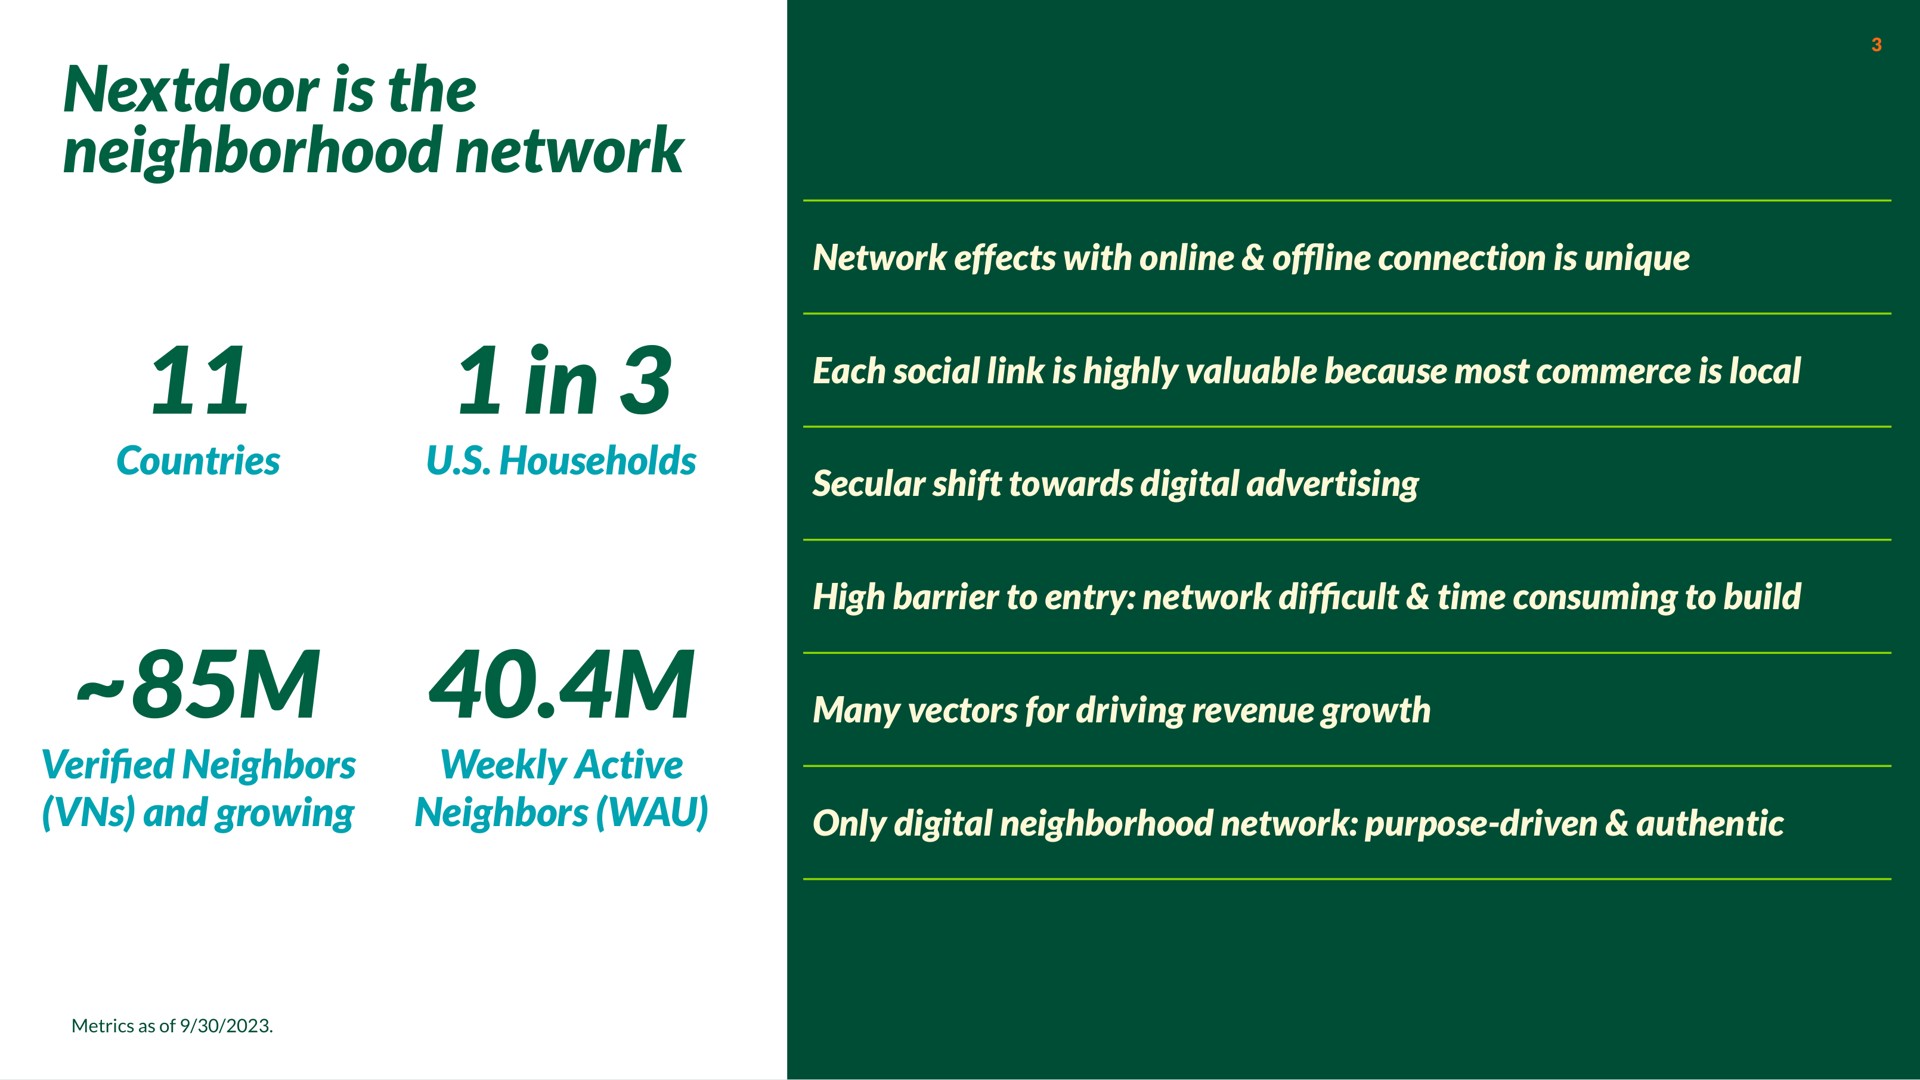 is the neighborhood network in countries households network effects with of connection is unique each social link is highly valuable because most commerce is local secular shift towards digital advertising high barrier to entry network cult time consuming to build veri neighbors and growing weekly active neighbors many vectors for driving revenue growth only digital neighborhood network purpose driven authentic in | Nextdoor